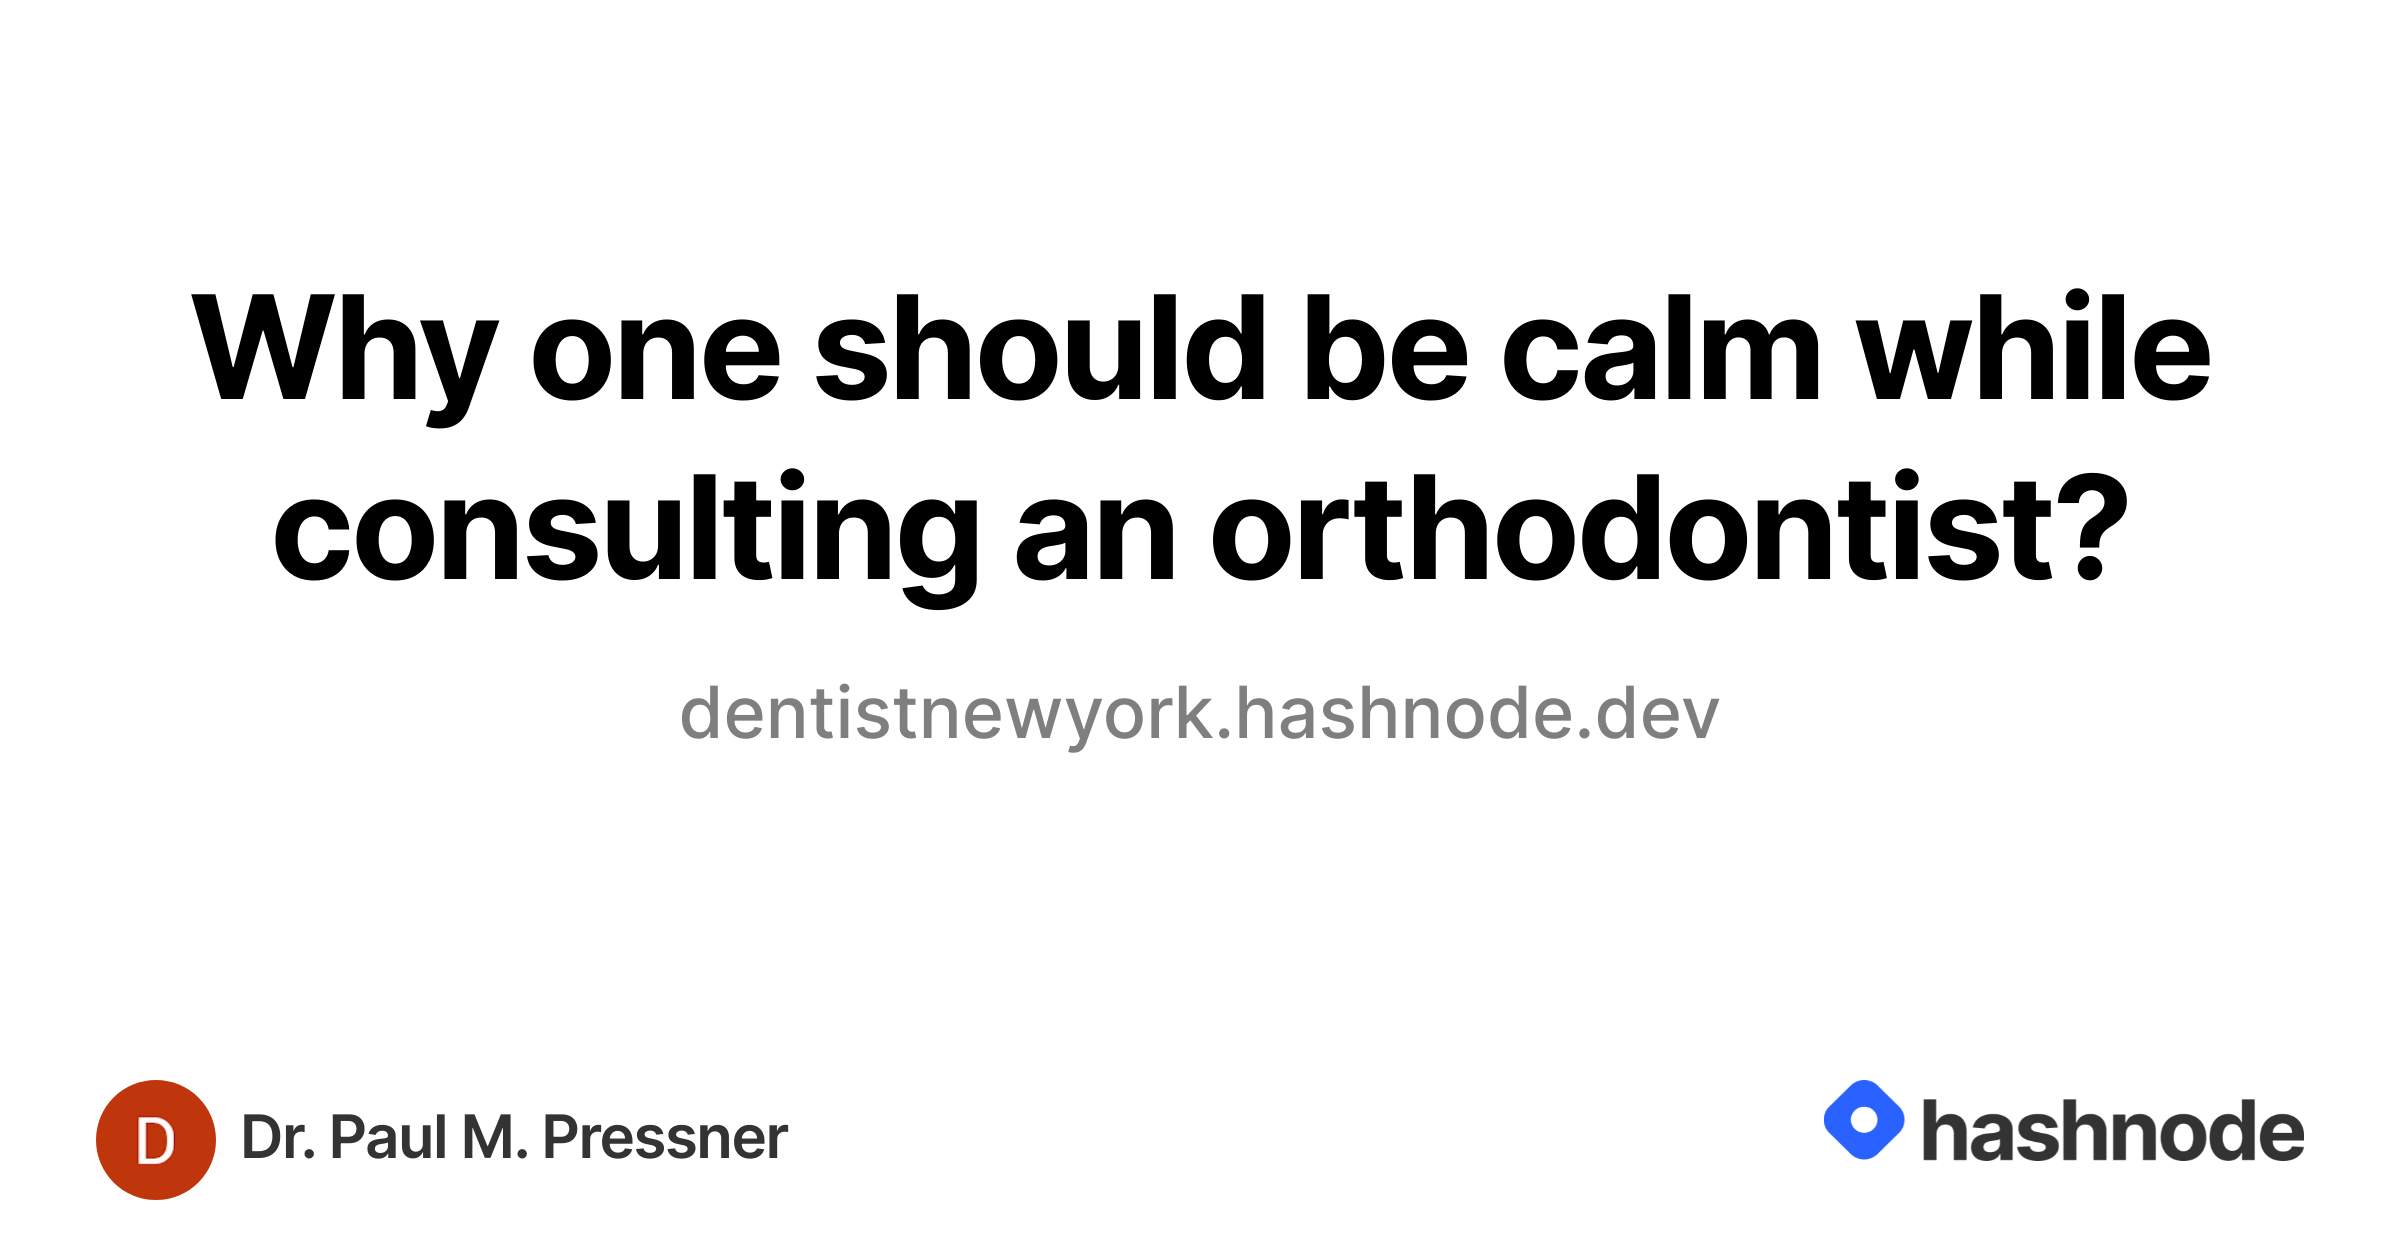 Why one should be calm while consulting an orthodontist?